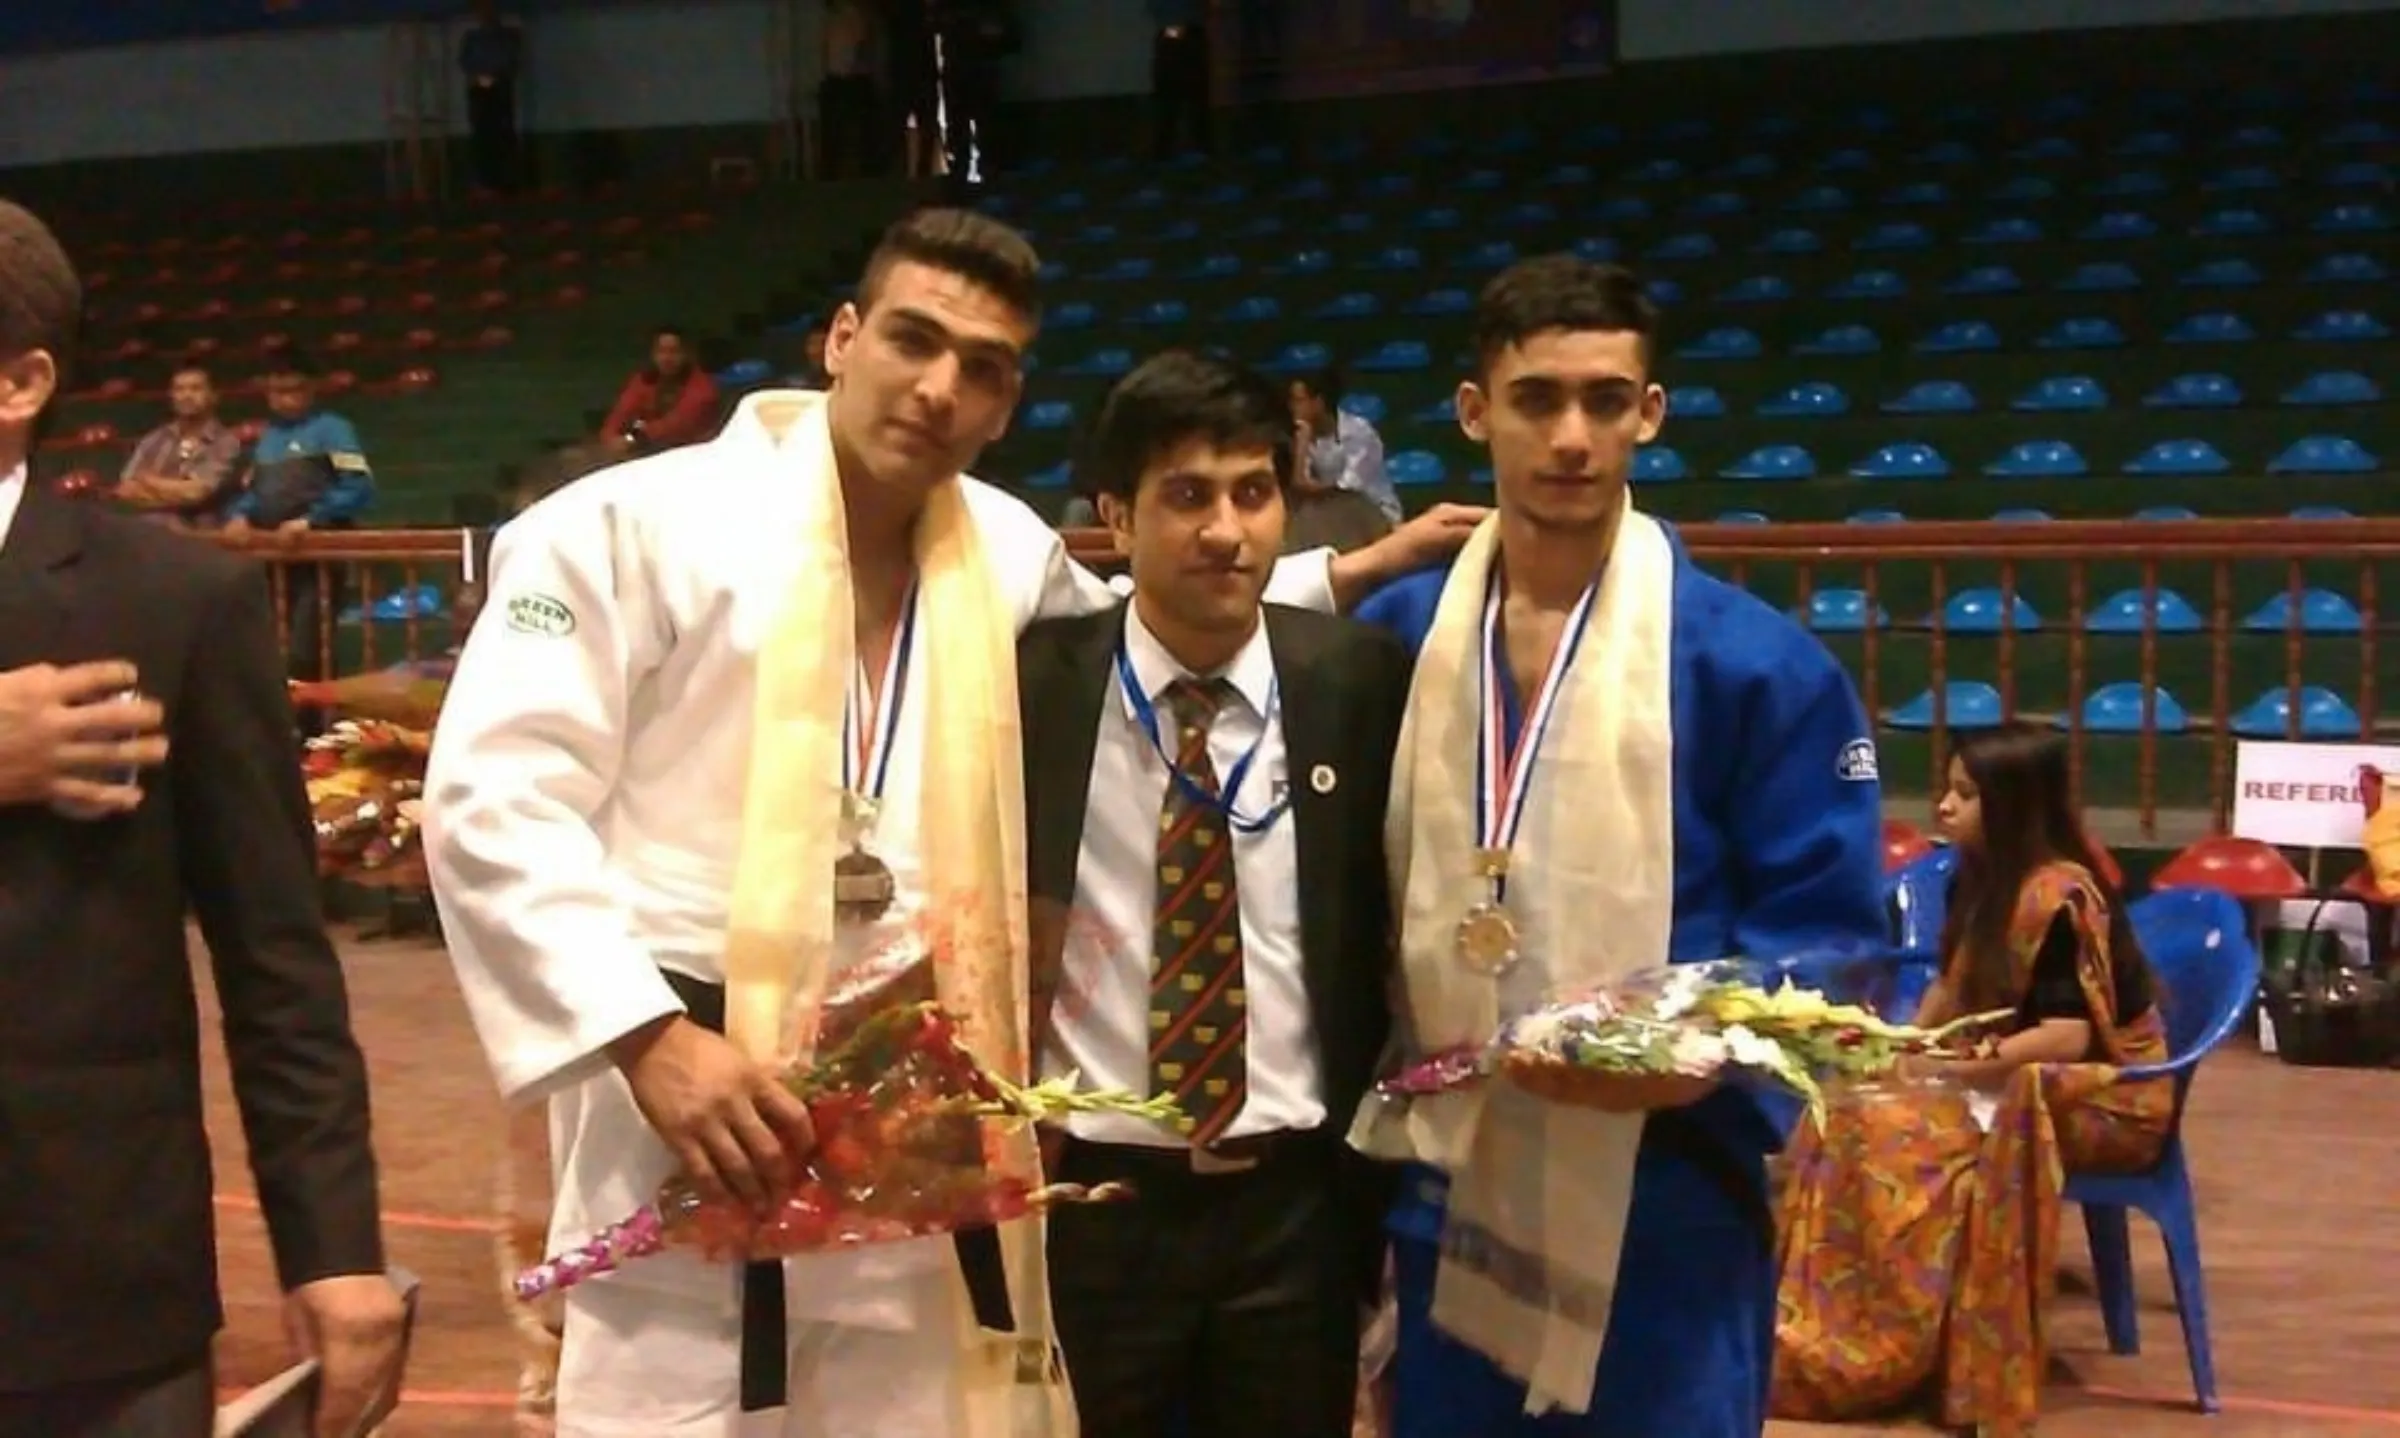 Three men are pictured side by side, two are in judogi and holding flowers